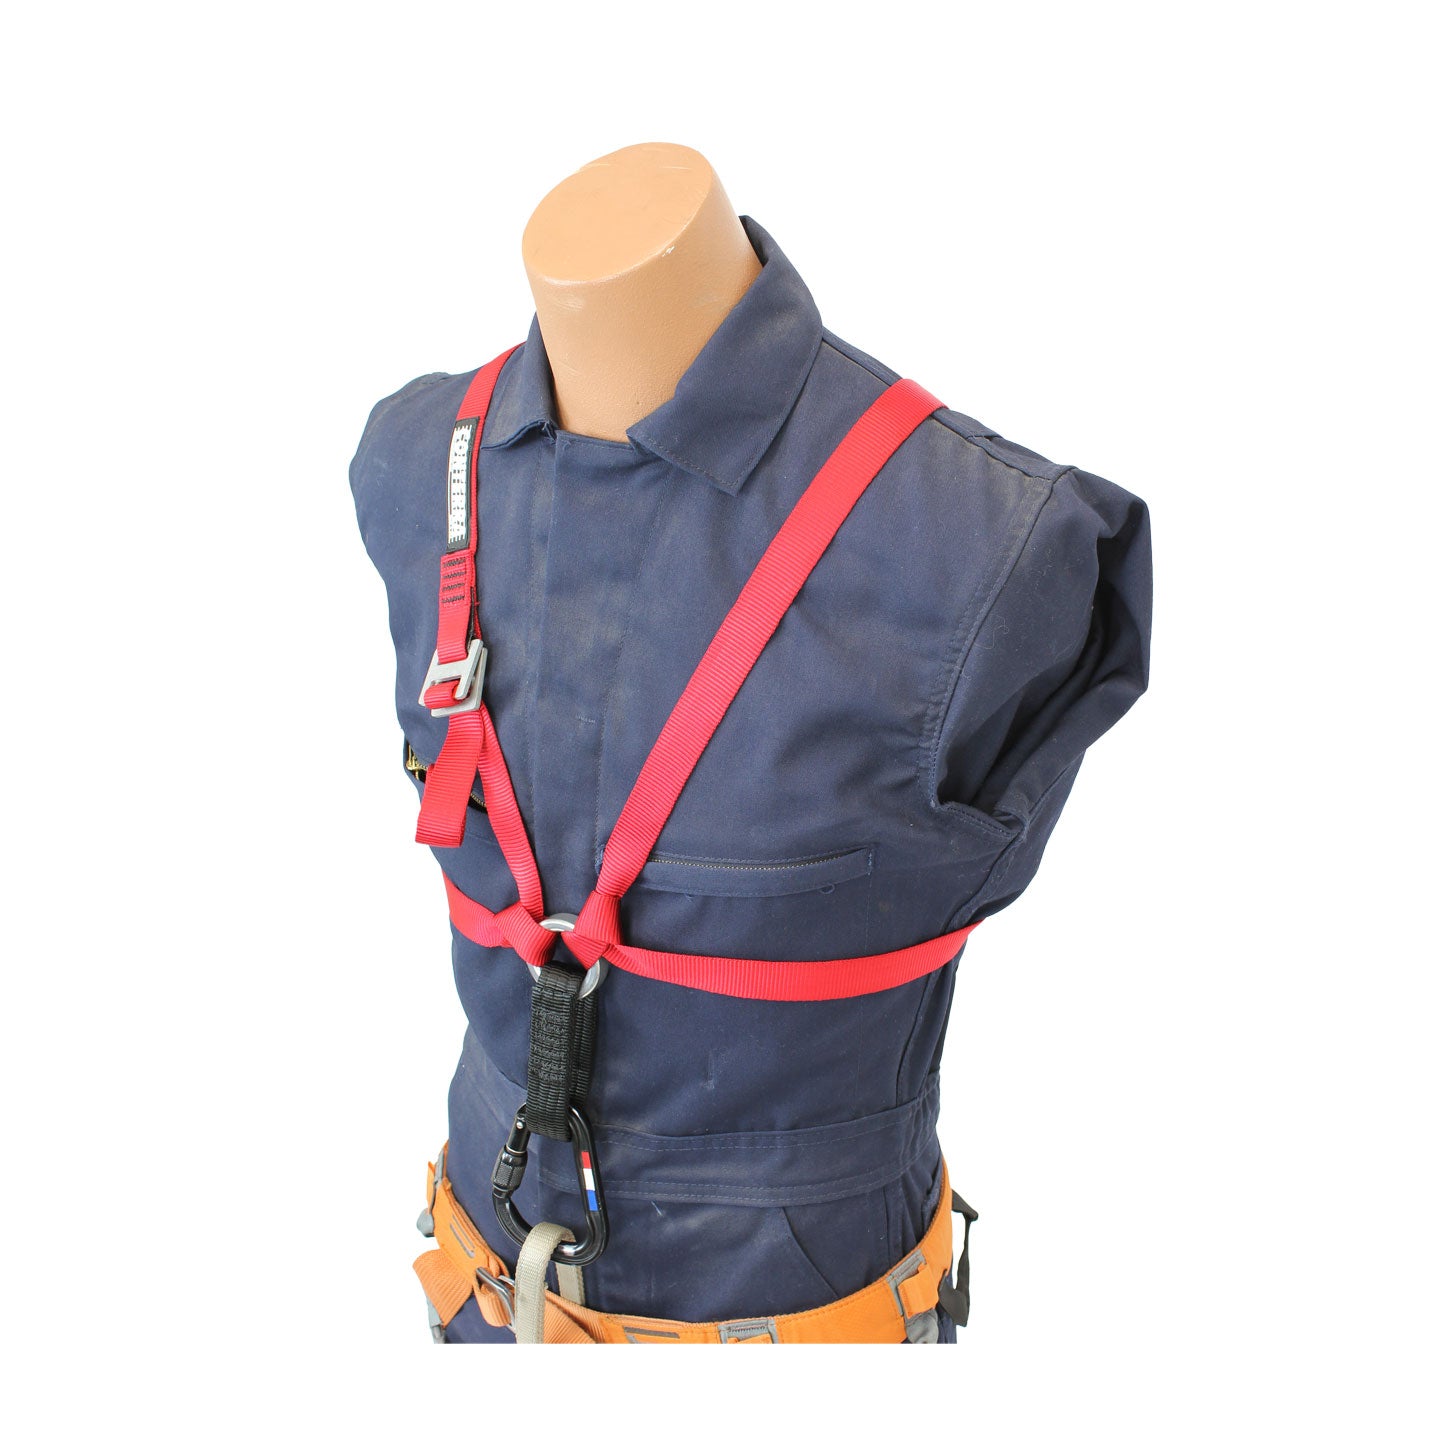 Mountain-Lite Chest Harness